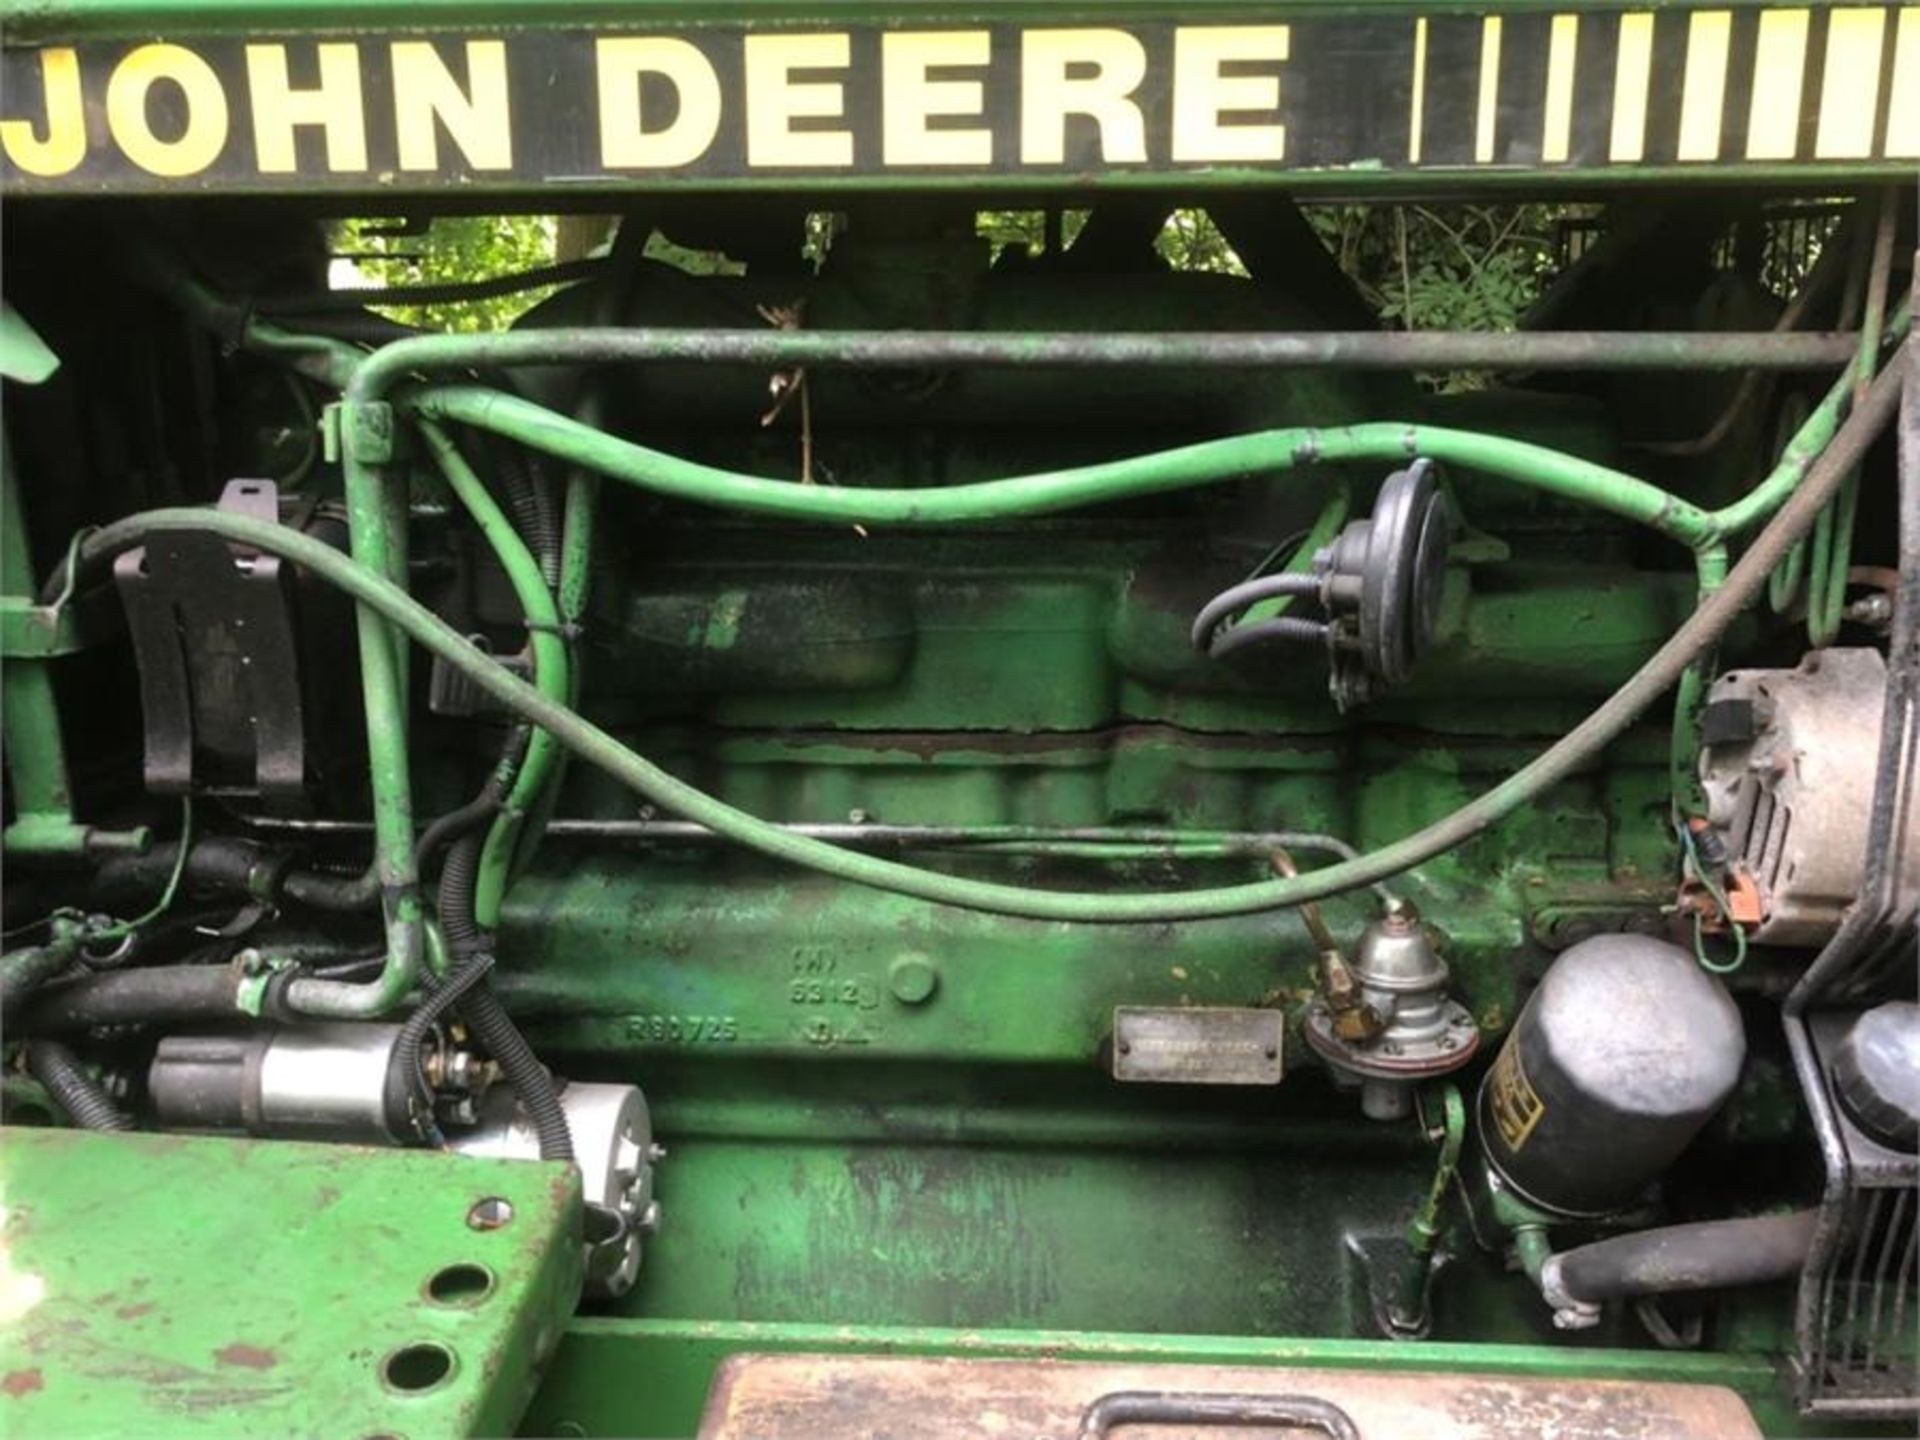 JOHN DEERE 3050 4WD TRACTOR SG2 CAB - Image 3 of 8